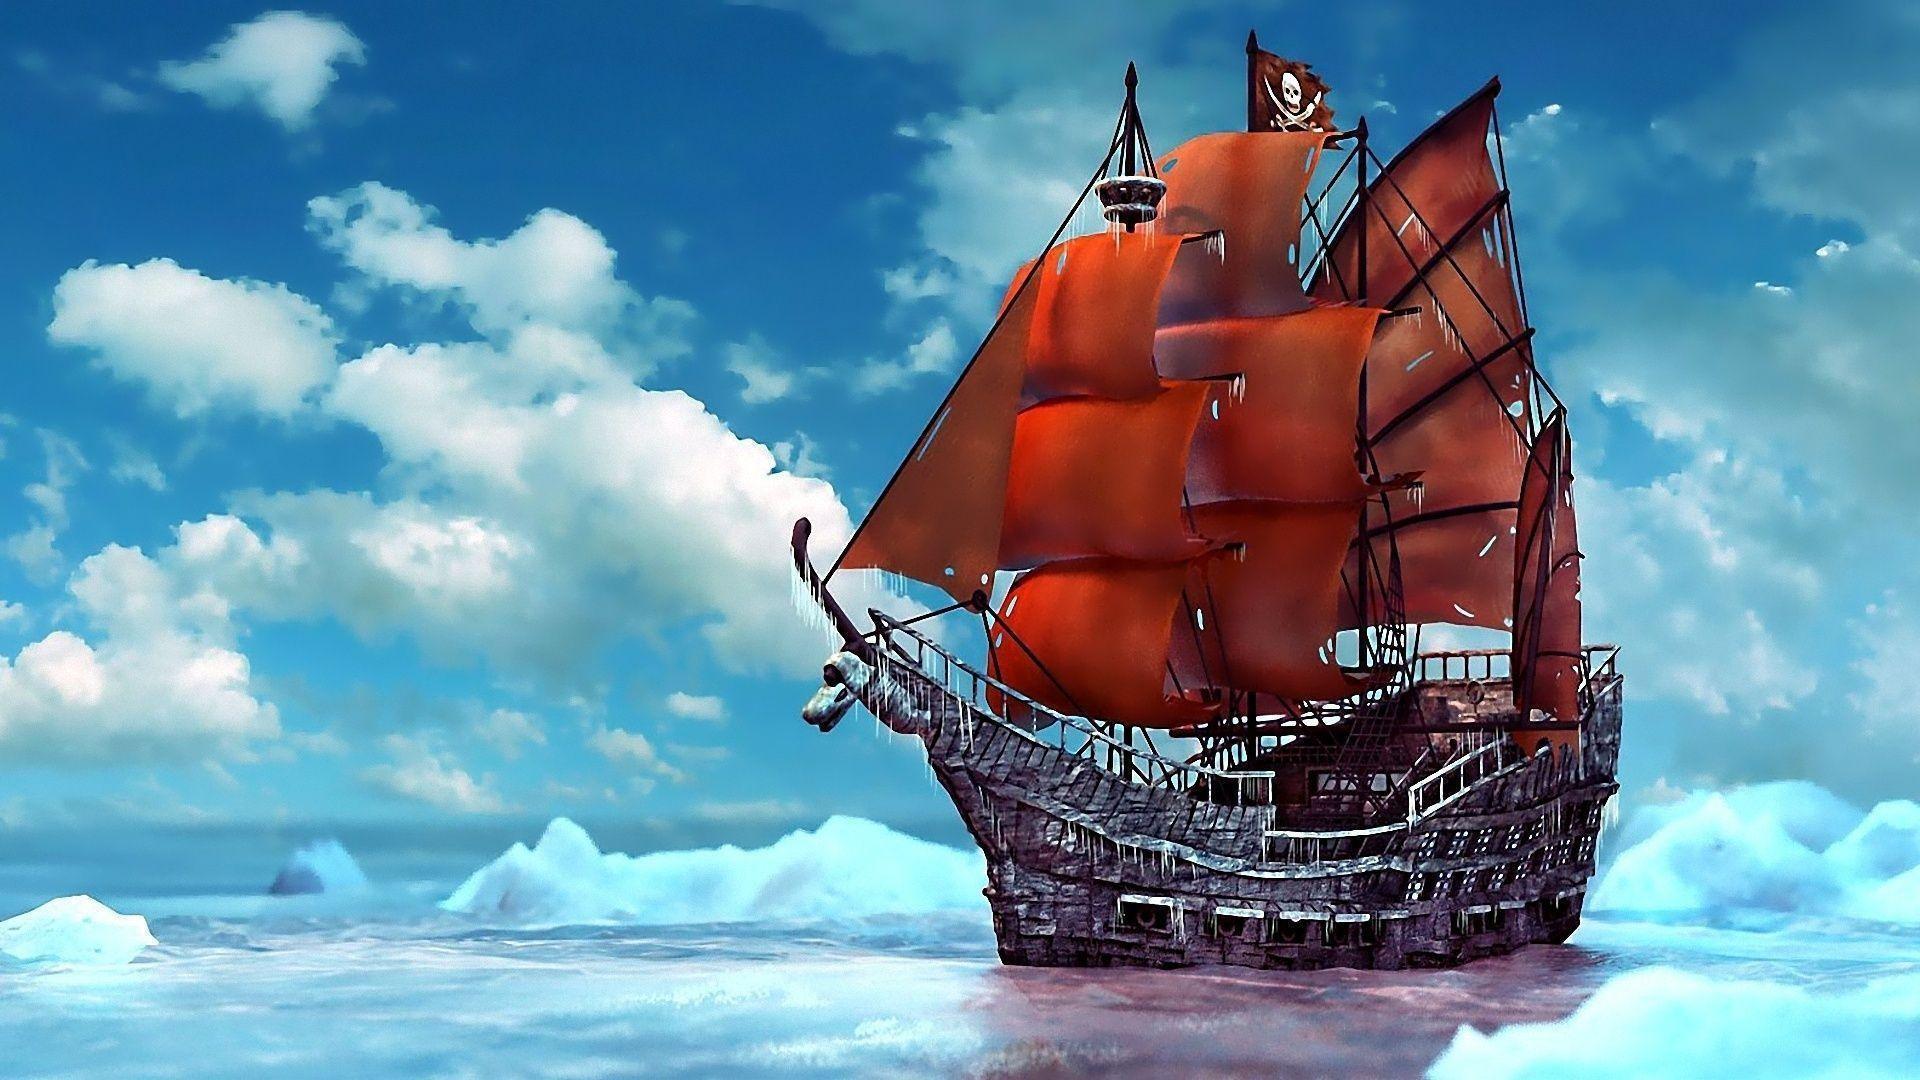 Animals For > Pirate Ship Deck Wallpaper